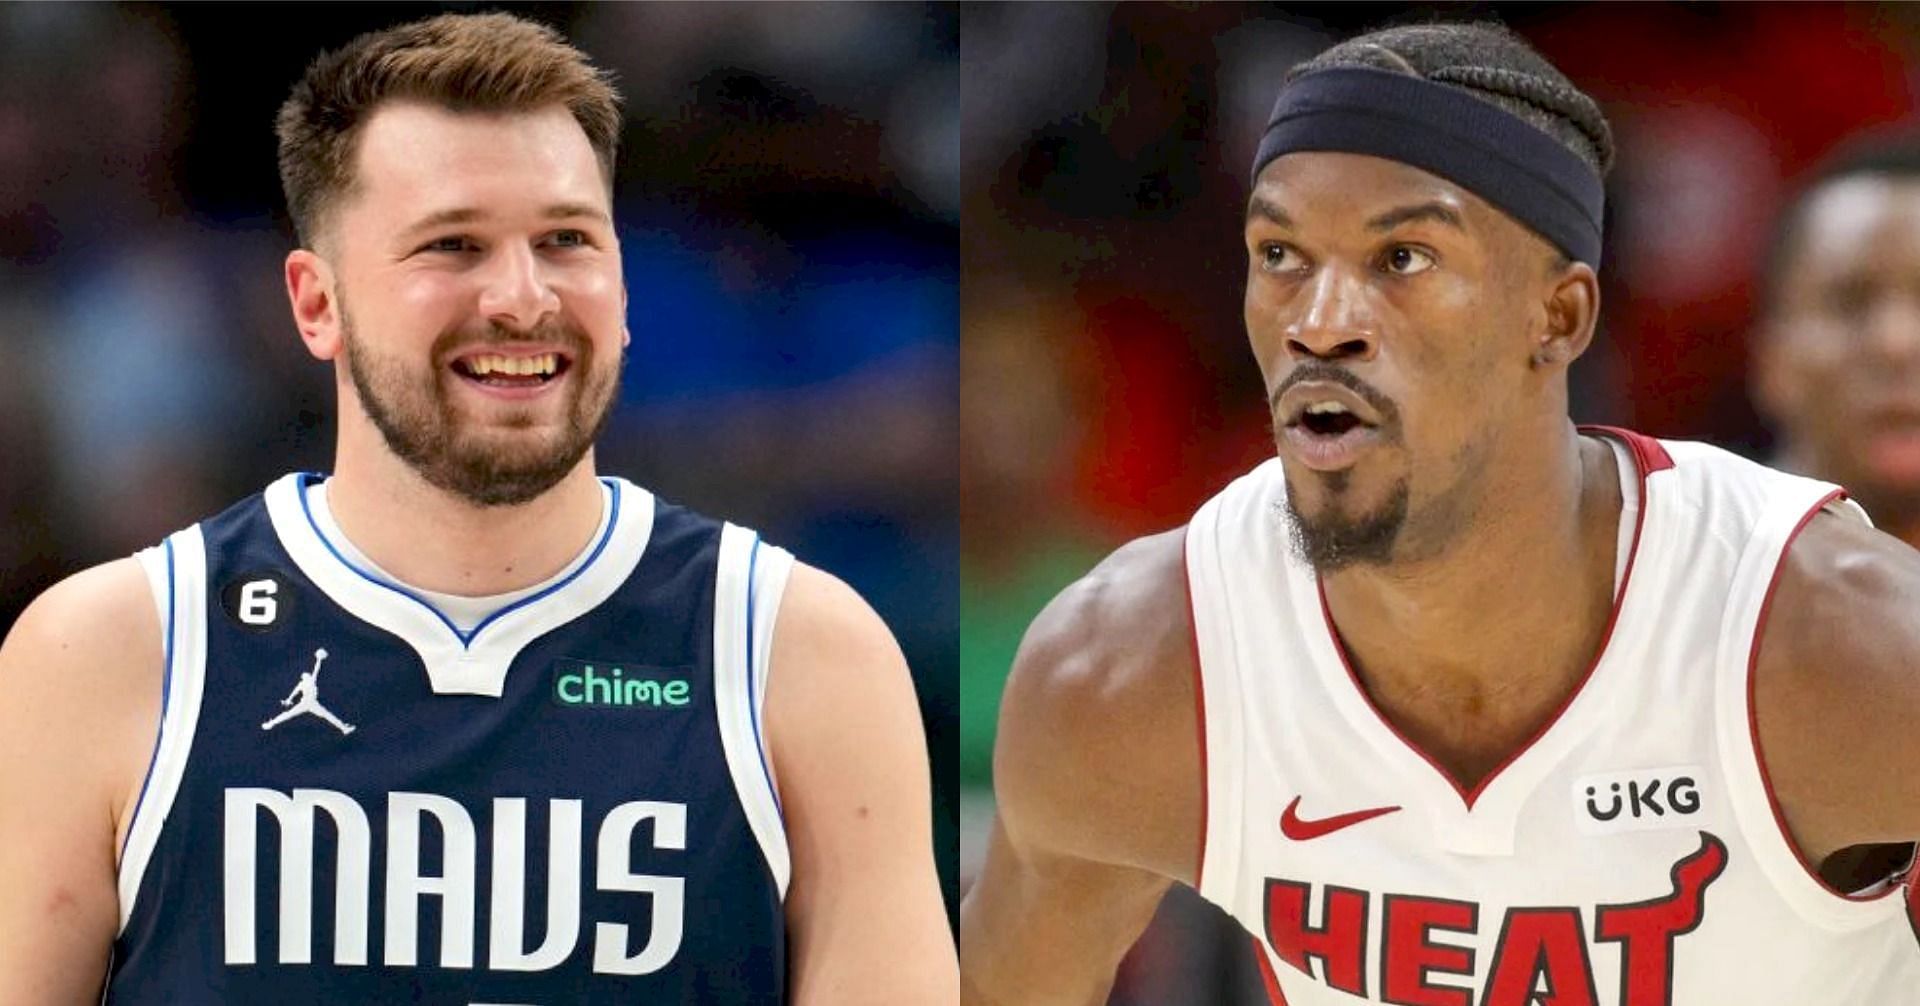 NBA superstars Luka Doncic and Jimmy Butler